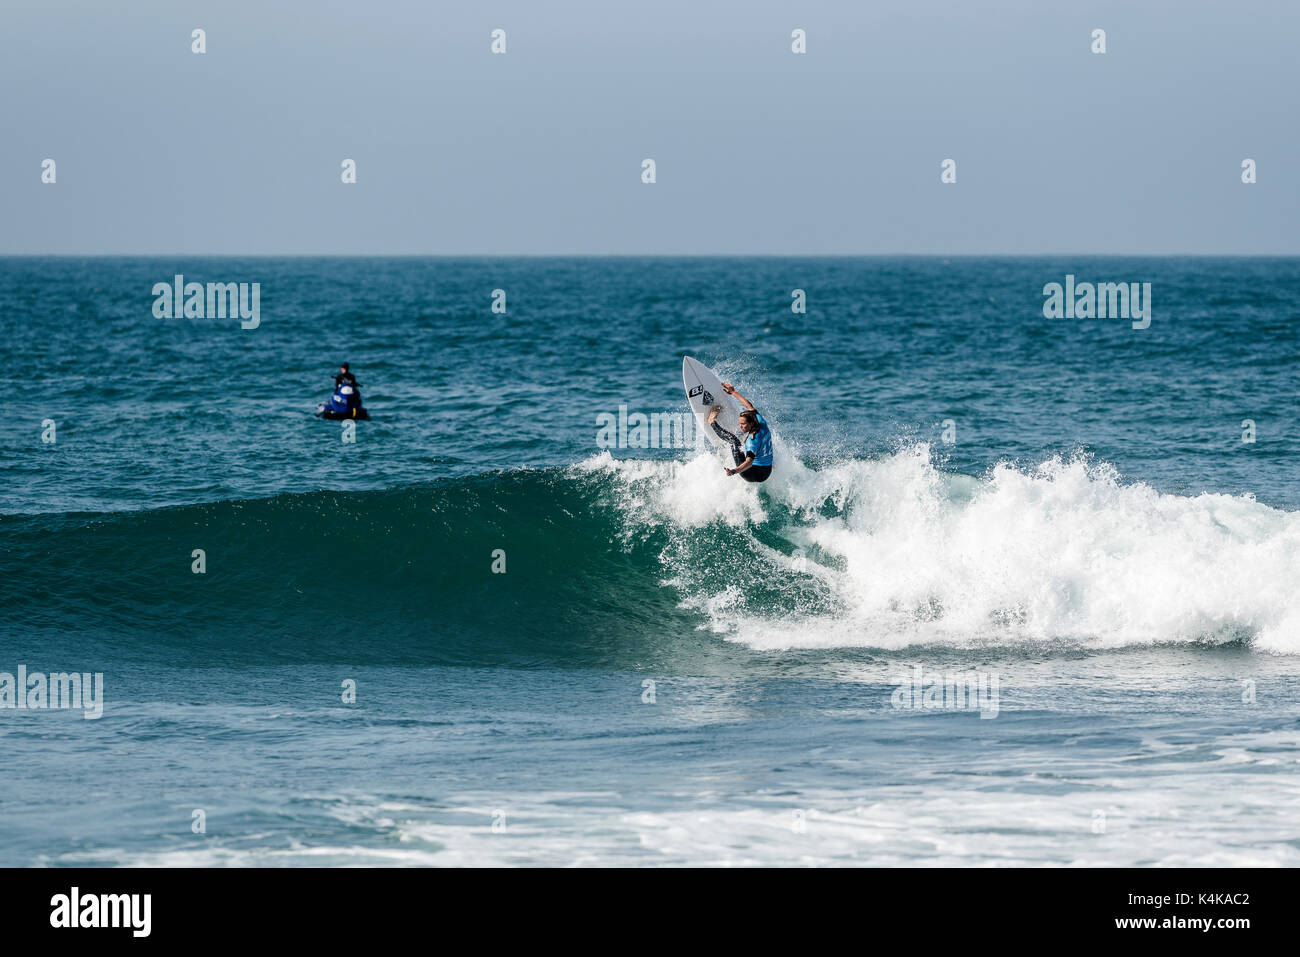 San Clemente, USA. 06th Sep, 2017. Round one of surfing at the 2017 Swatch Women's Pro at Lower Trestles, San Onofre State Beach, San Clamente, CA on September 06, 2017. Surfer: Keely Andrew (AUS). Credit: Benjamin Ginsberg/Alamy Live News  Stock Photo